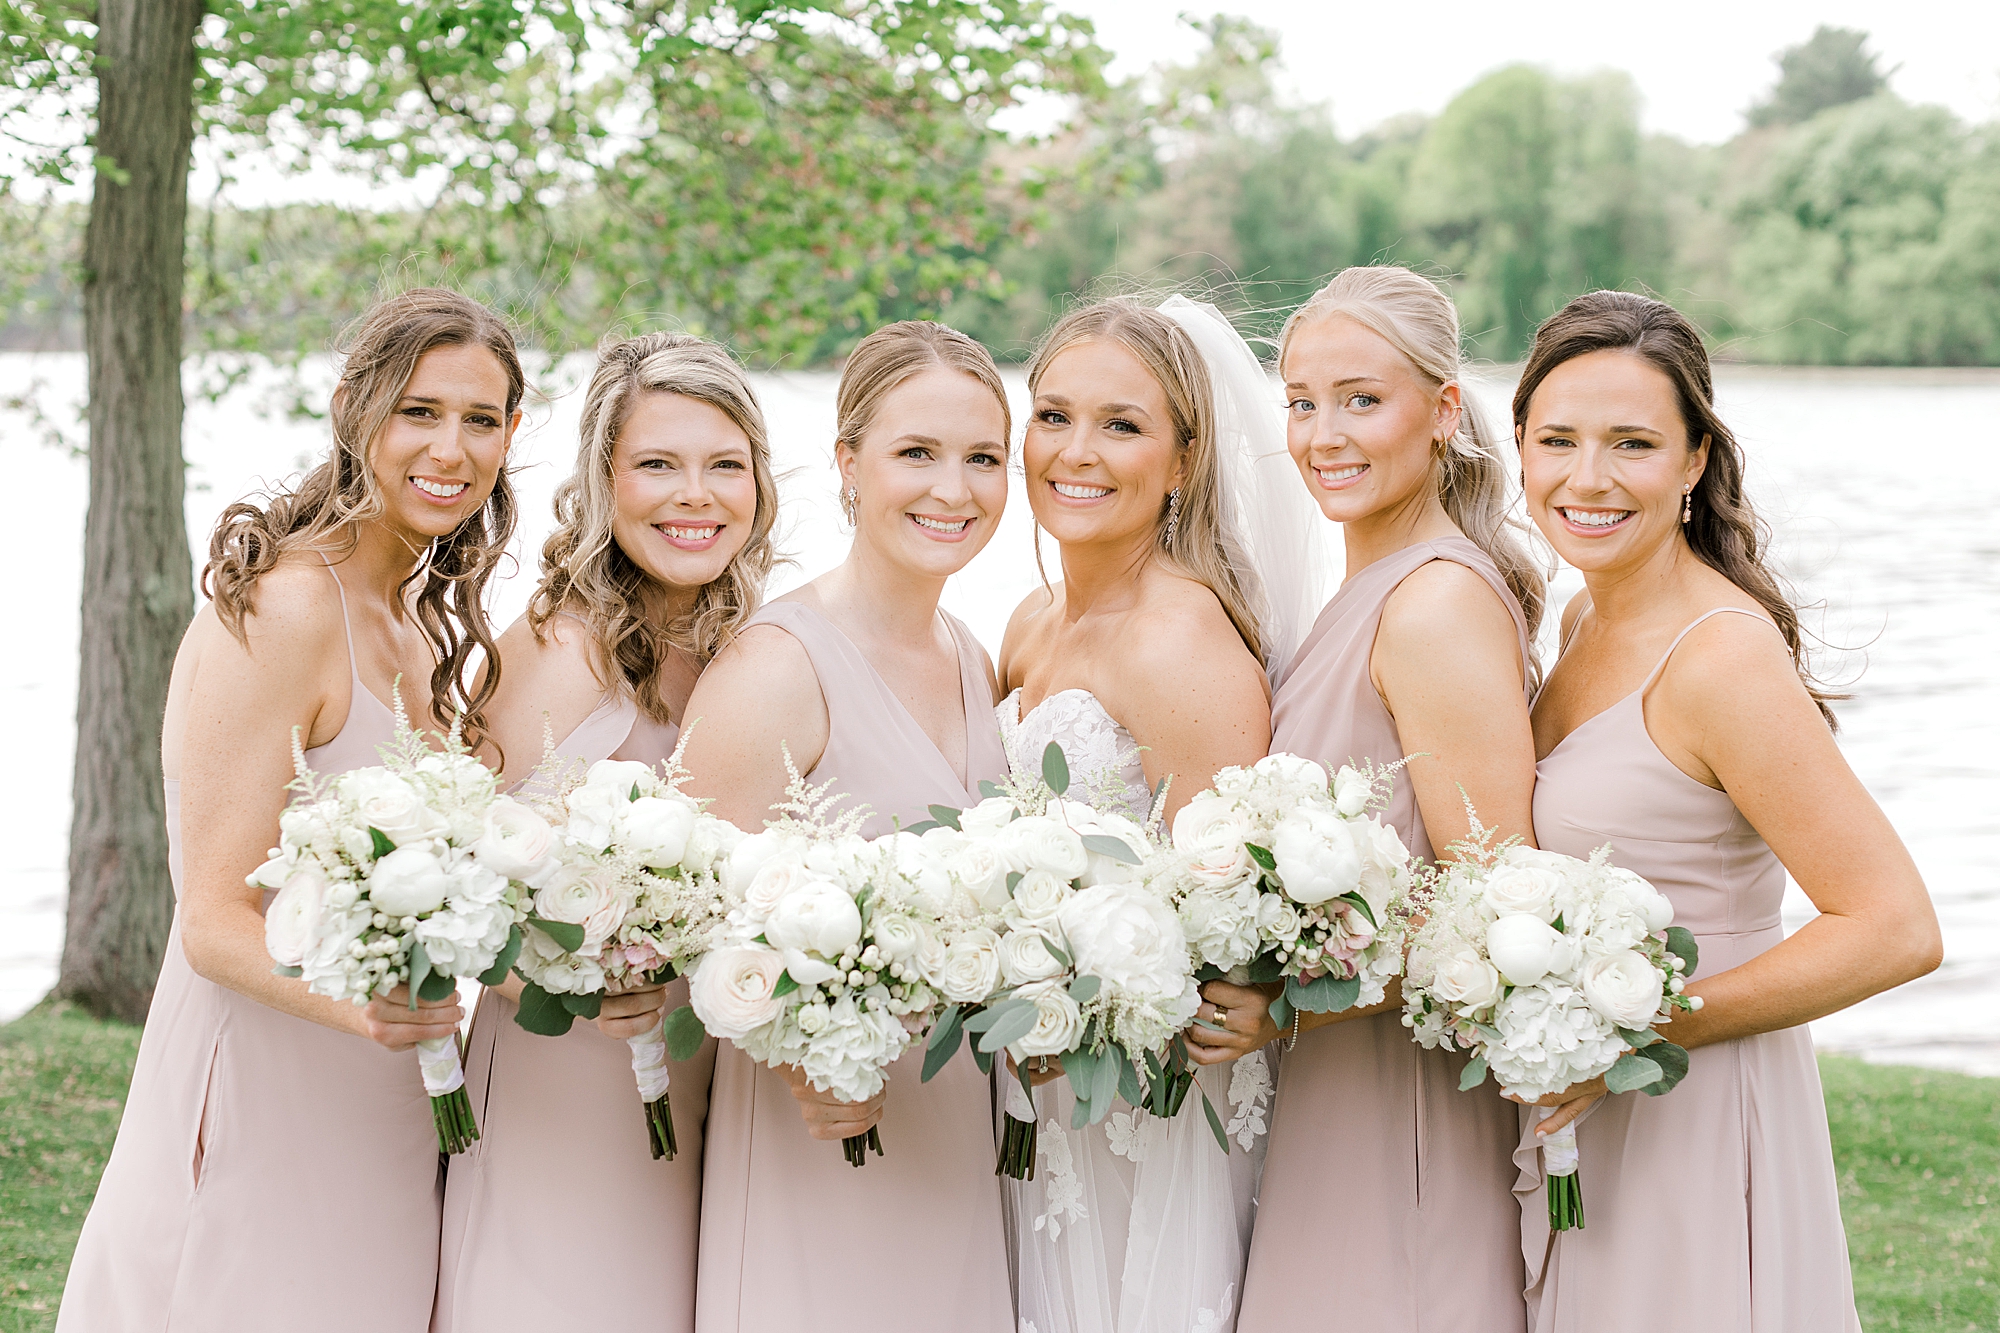 bride poses with bridesmaids in pink gowns and white flowers